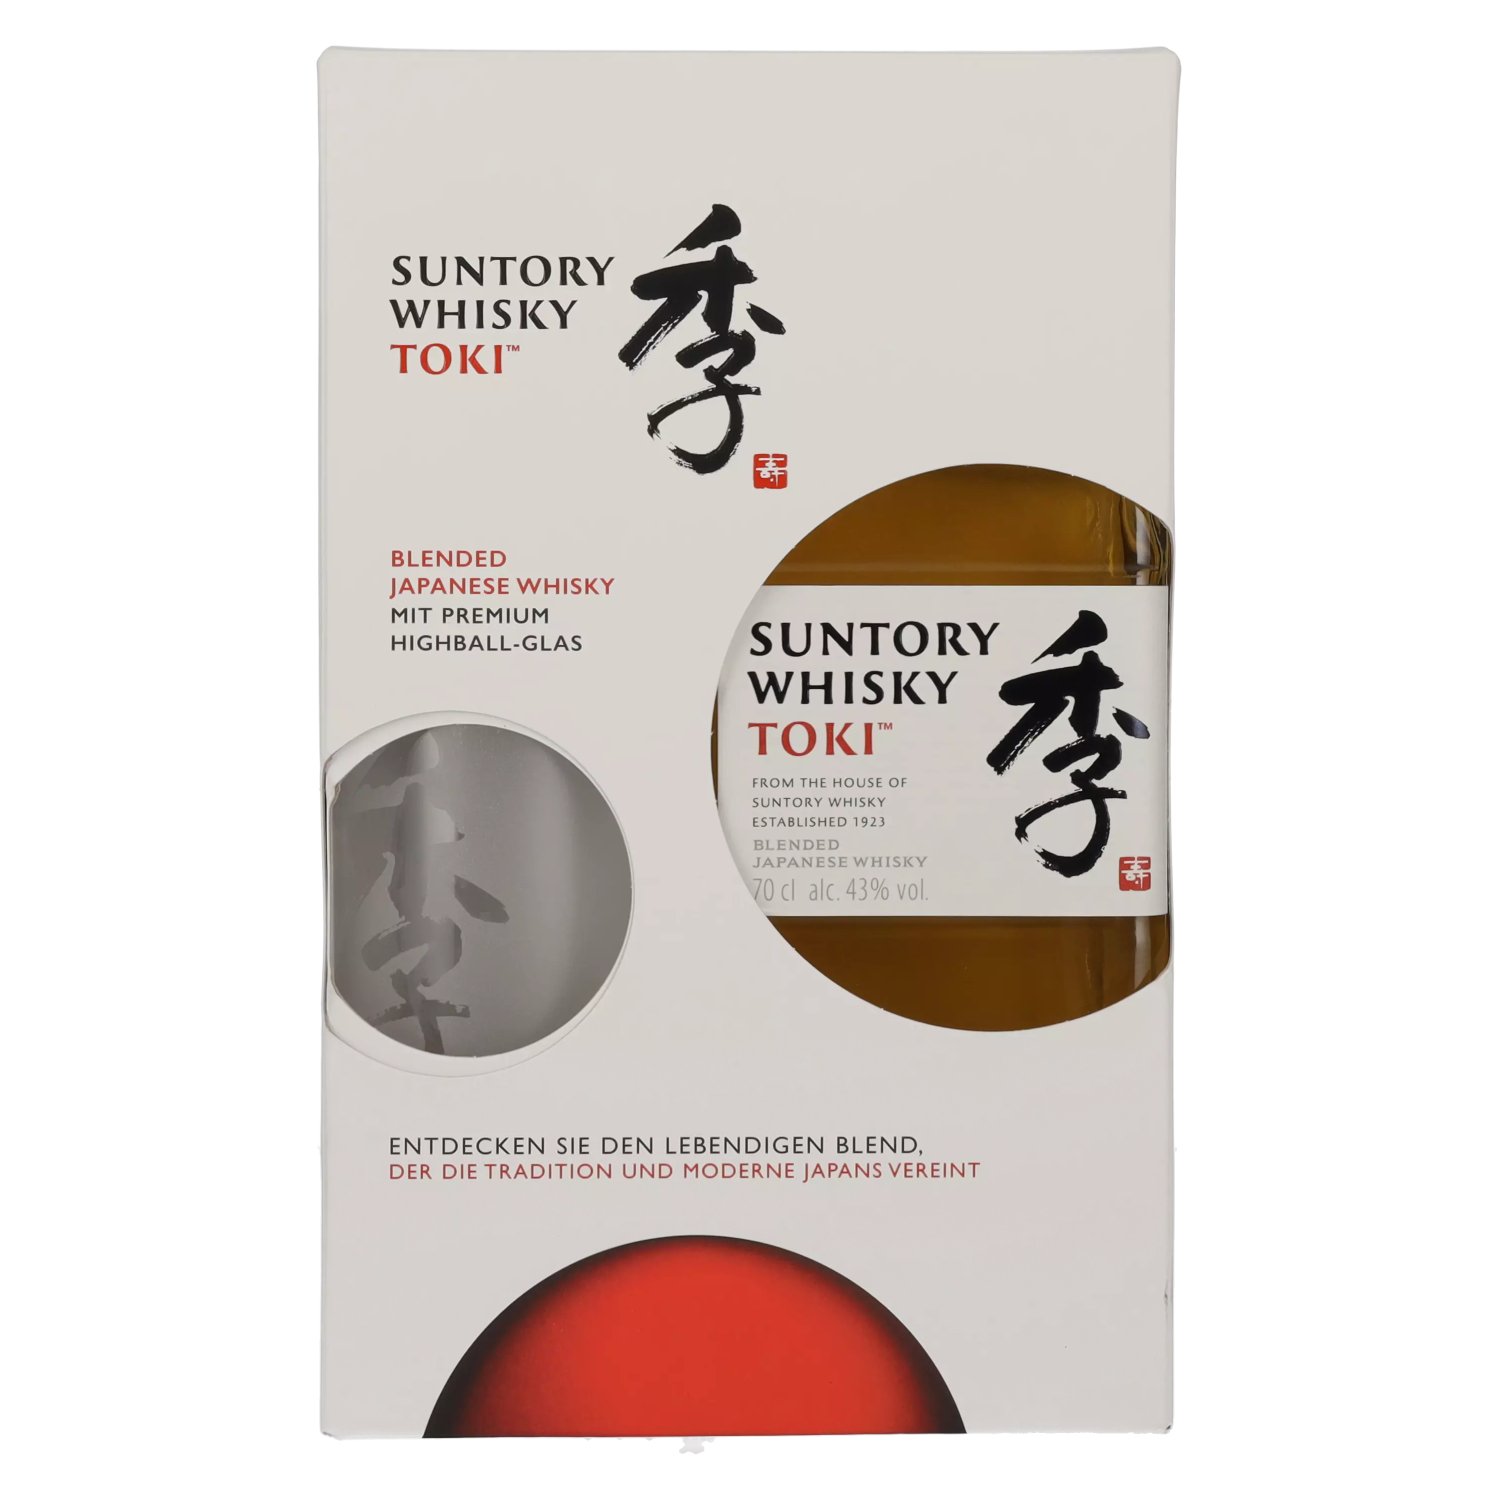 Suntory TOKI Blended Japanese Whisky 43% Vol. 0,7l in Giftbox with Highball  glass